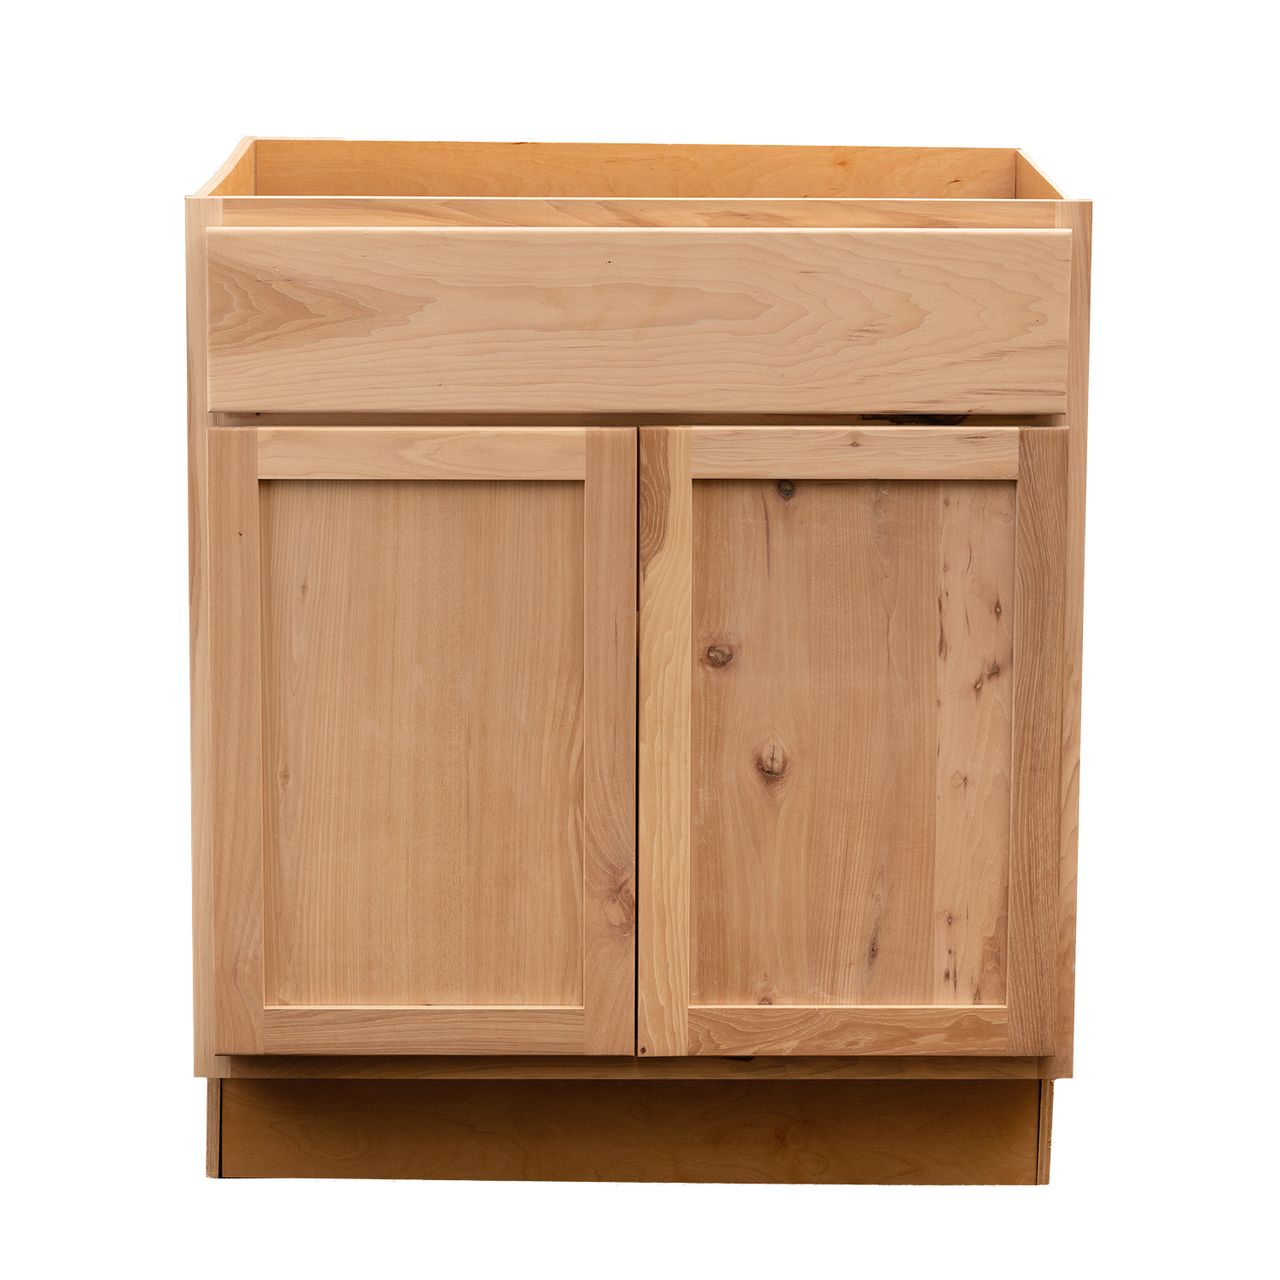 Quicklock RTA (Ready-to-Assemble) Raw Hickory Base Cabinet- Double Door (30", 36"W)